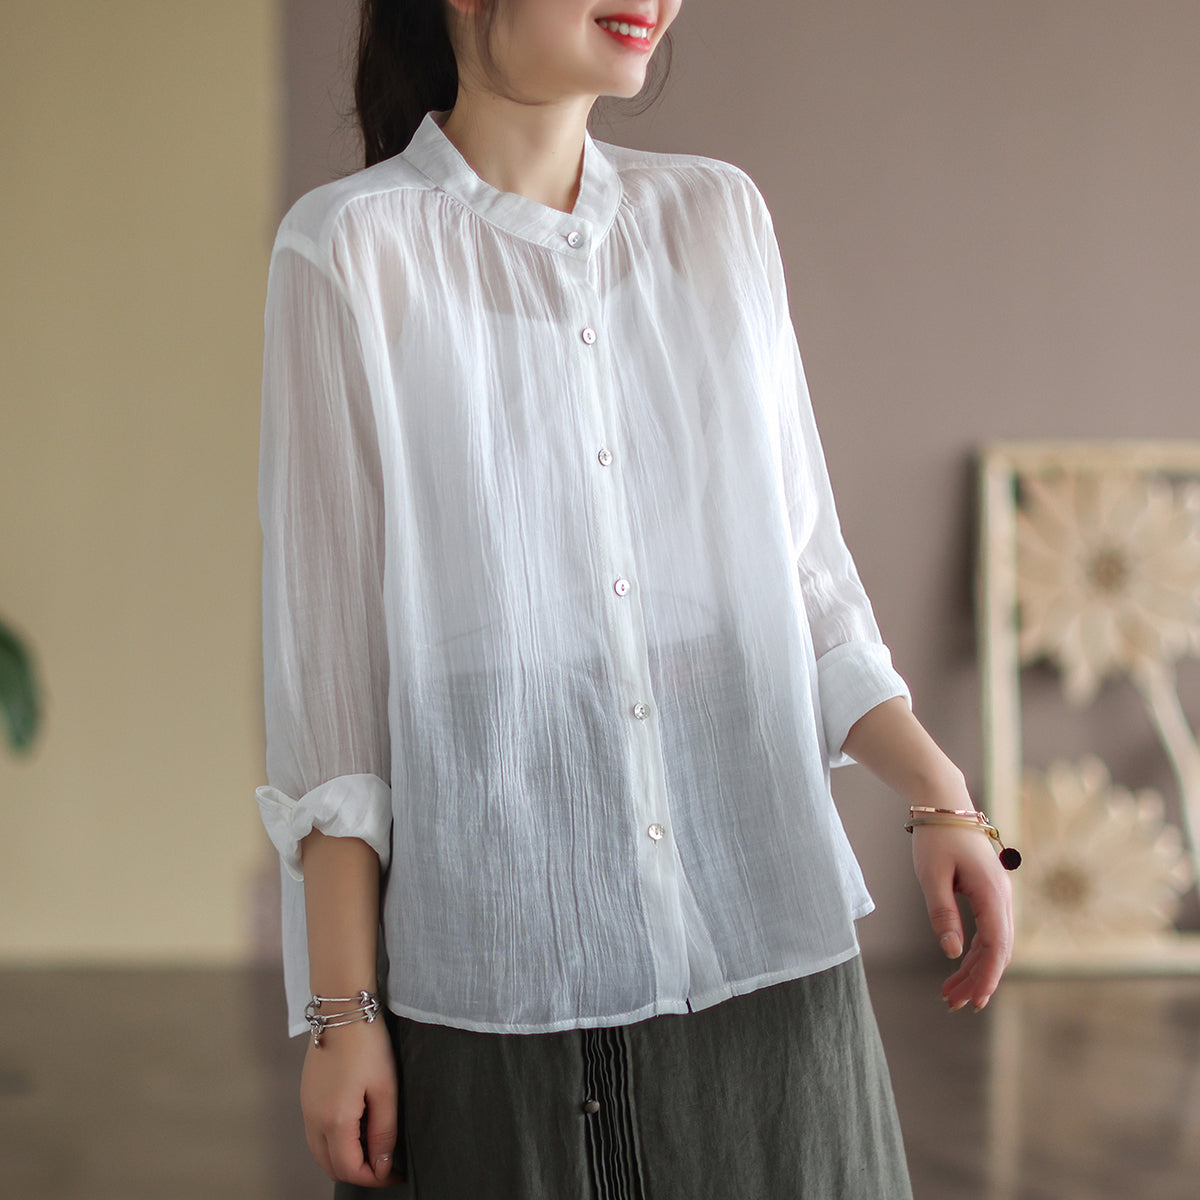 Summer Sun-Proof Women Loose Linen Blouse Mar 2022 New Arrival One Size White 